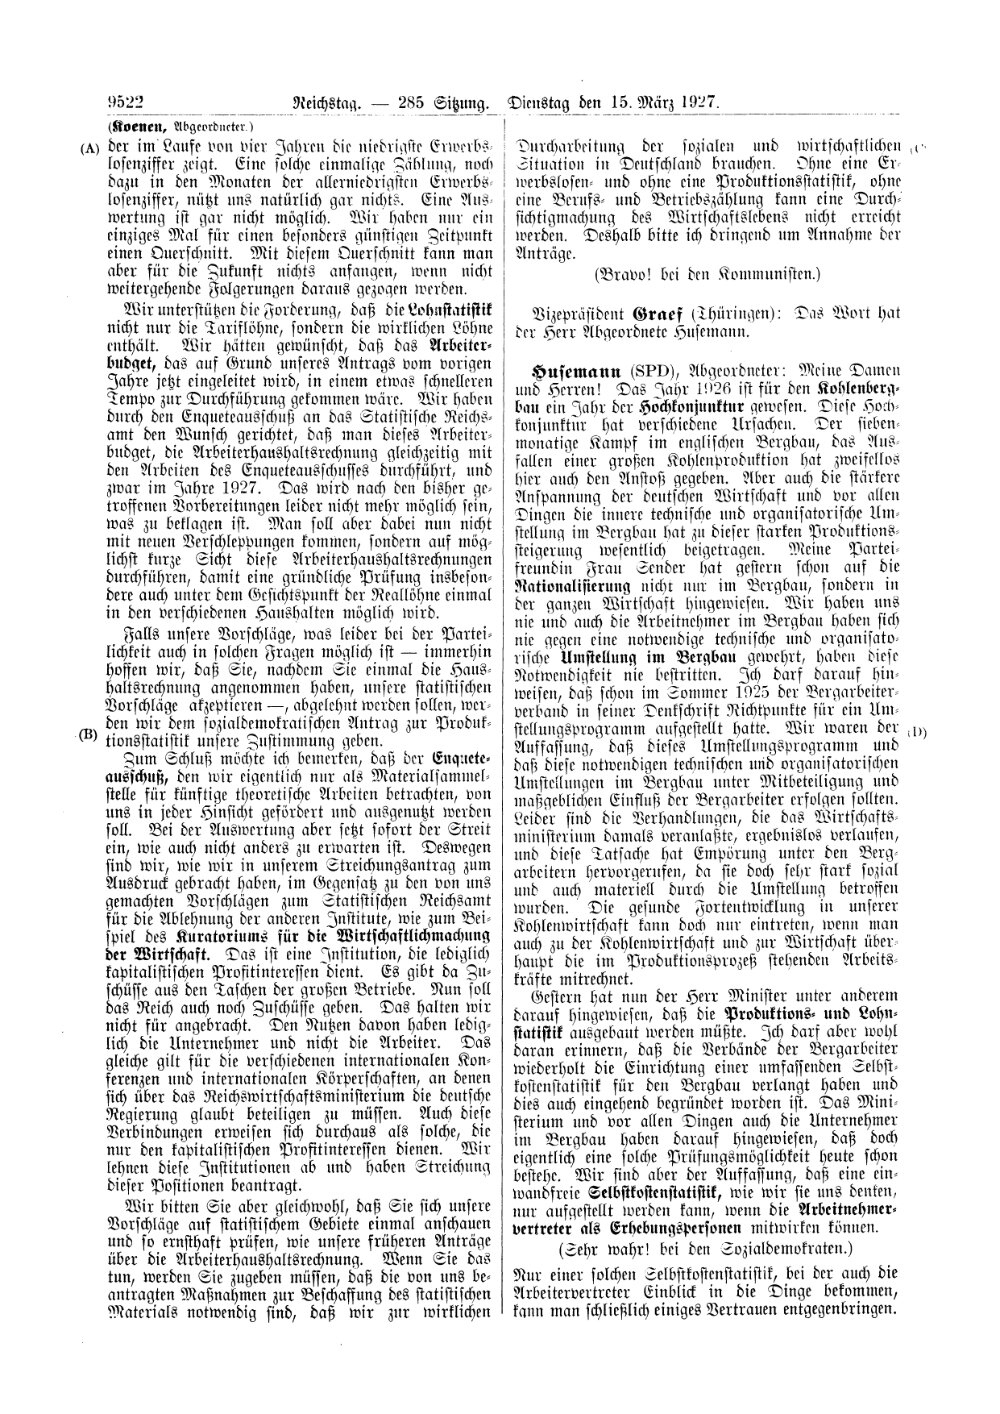 Scan of page 9522